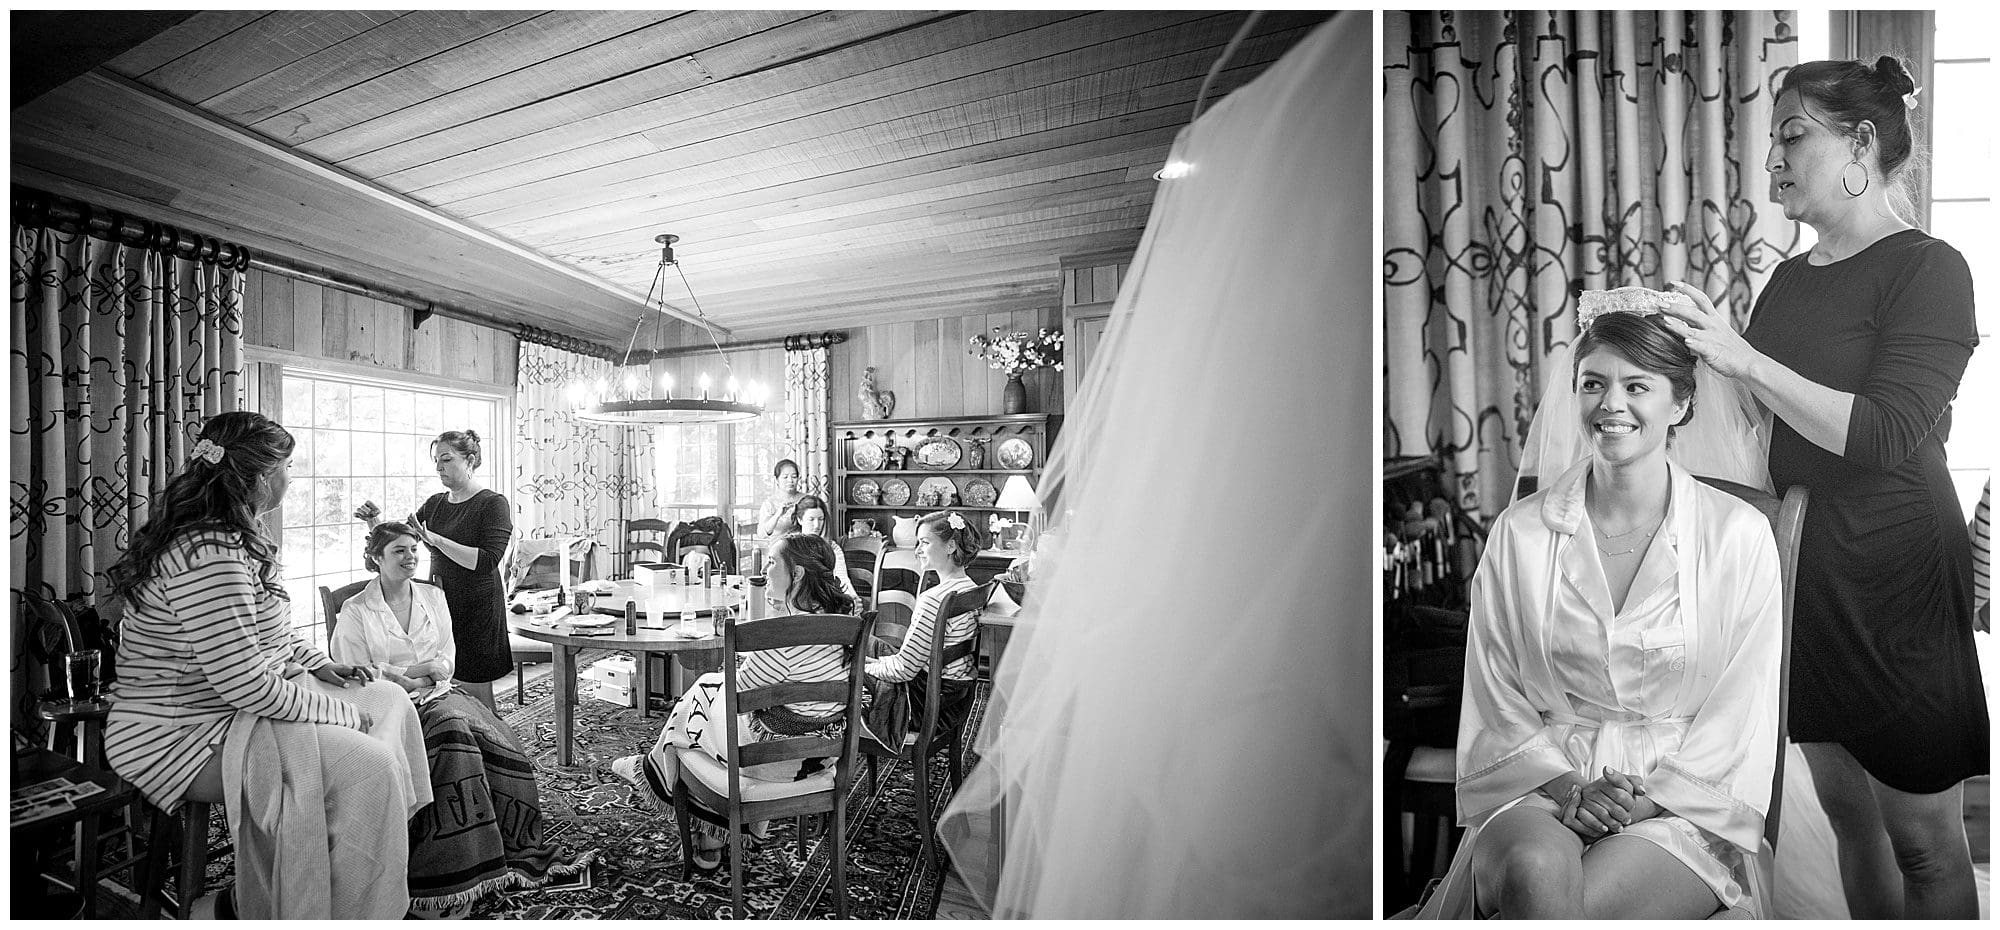 Black and white photos of a bride getting ready in a room.